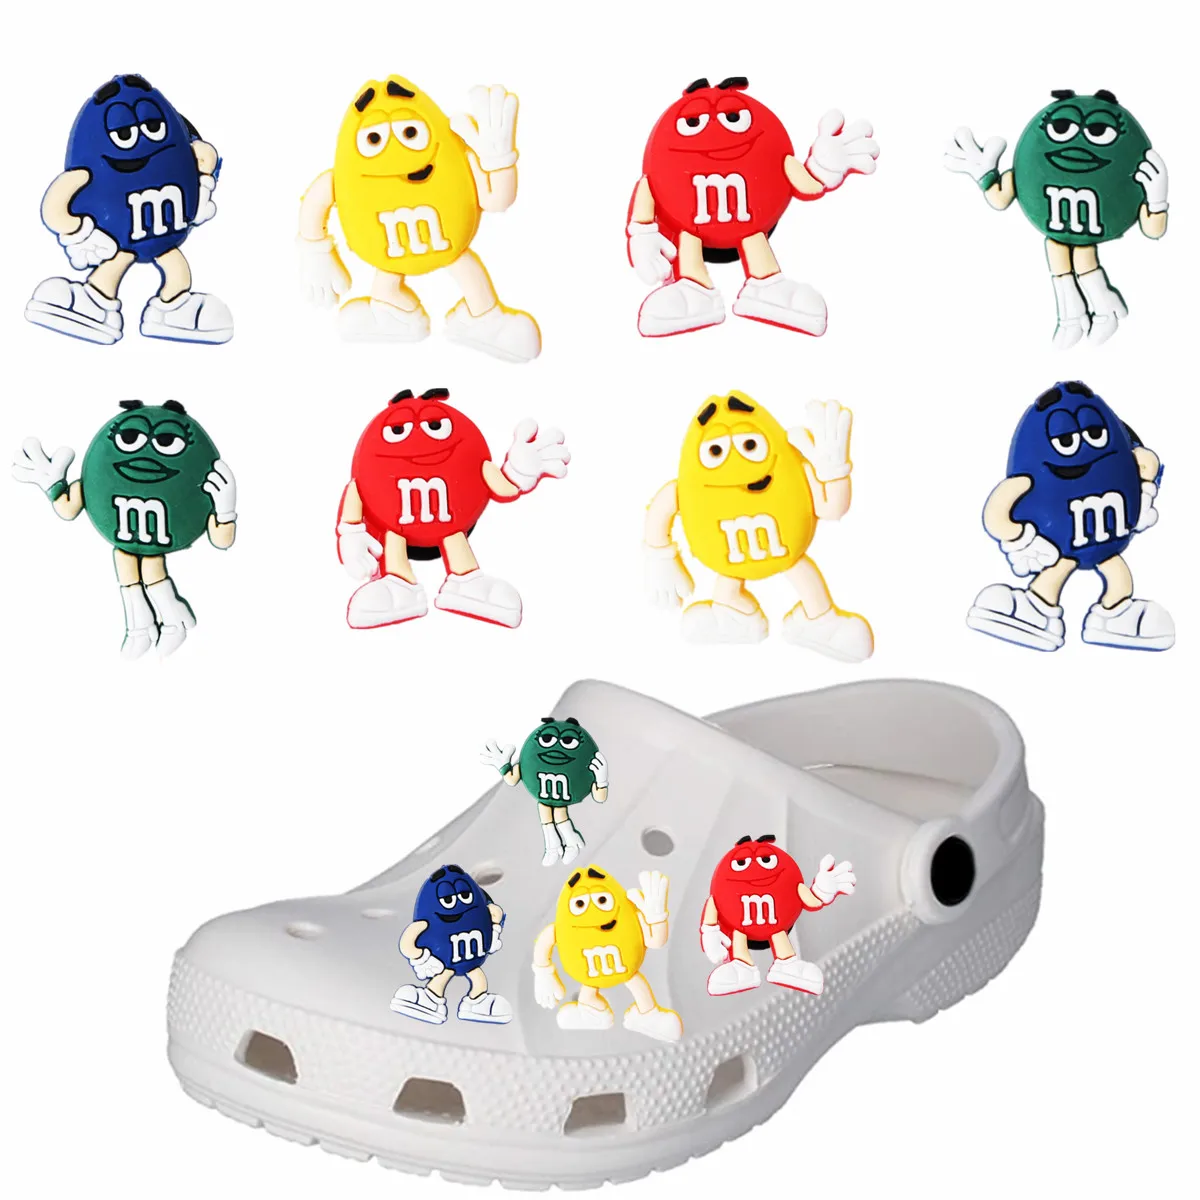 

Hot Sale Manufacturers wholesale pvc soft shoe lace croc Charms Clog Decoration Charms For clog Shoes as a party gift, As picture